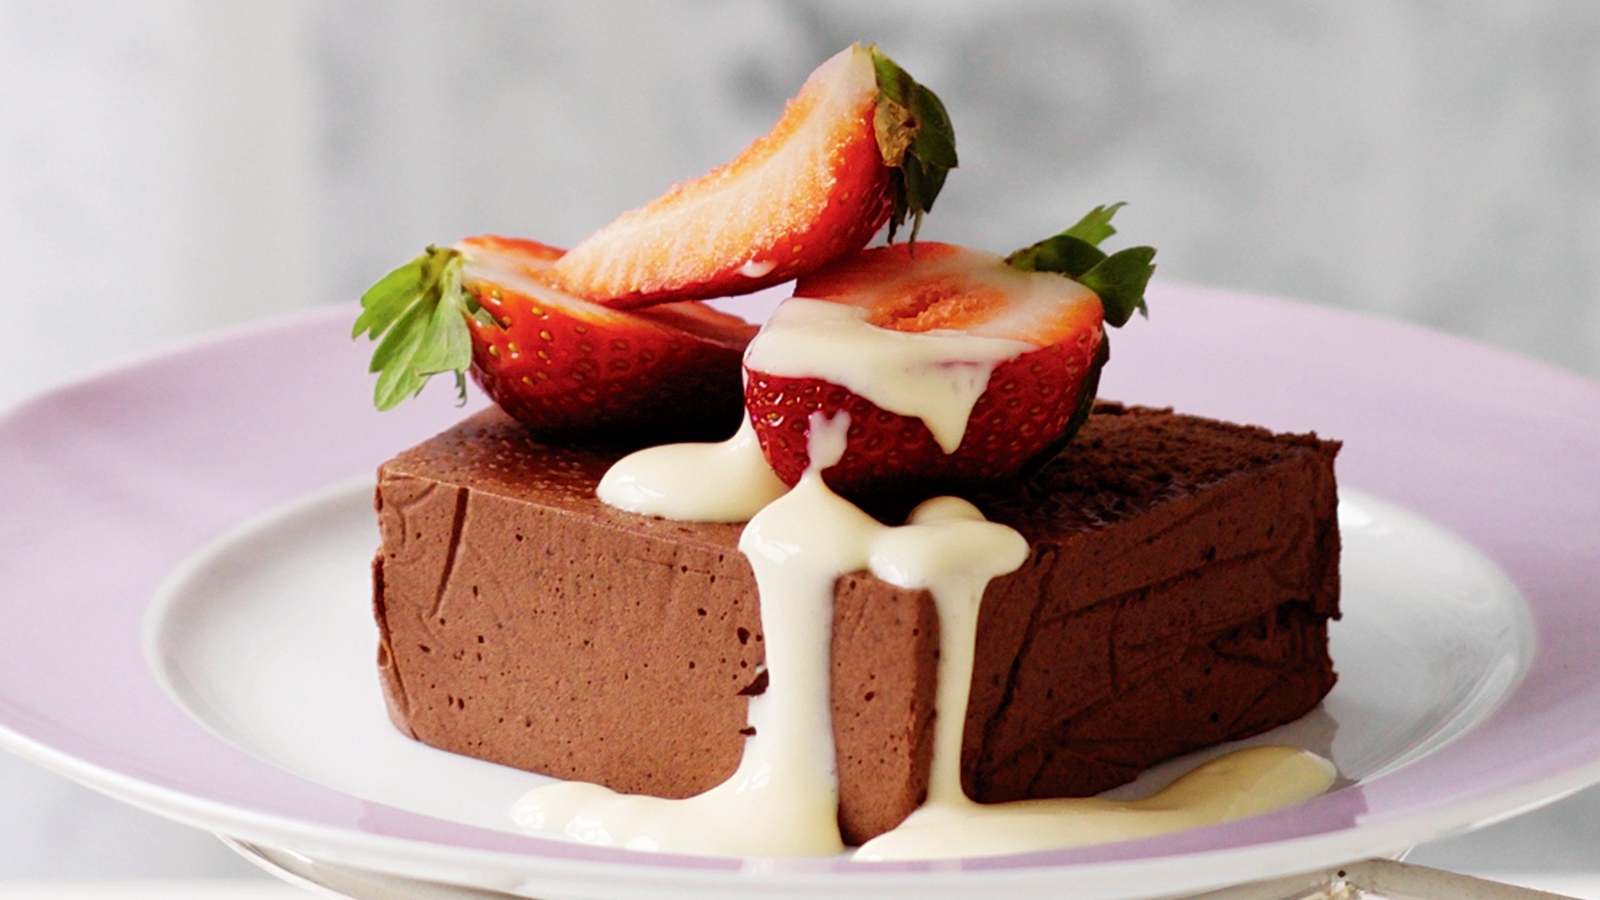 Chocolate soufflé with strawberries on a plate